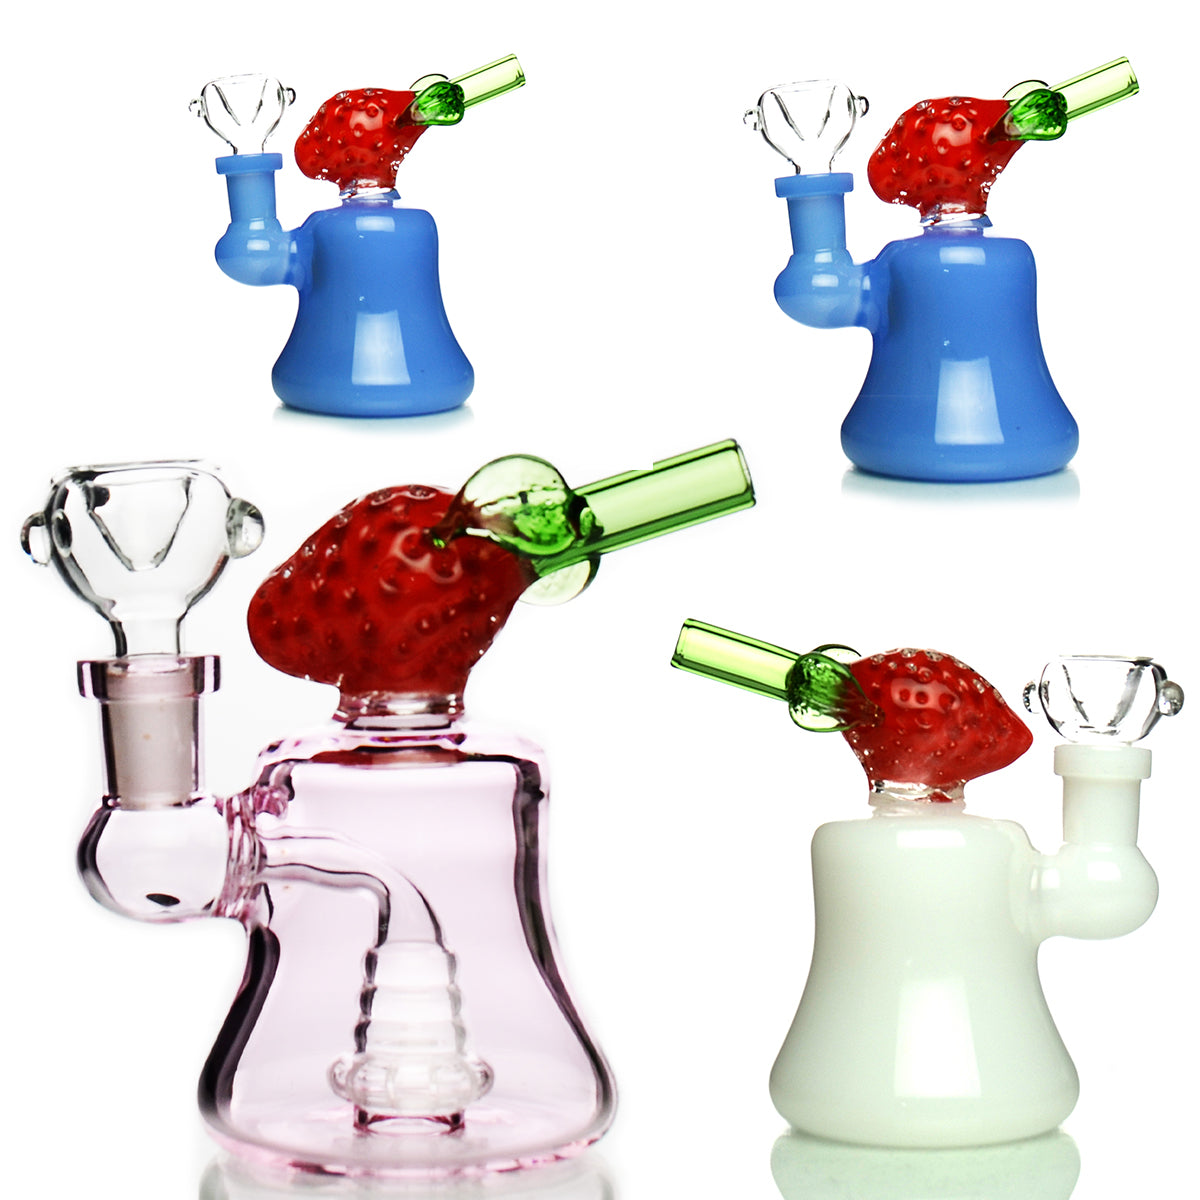 Strawberry Glass Bong with 14mm Male Bowl 6"